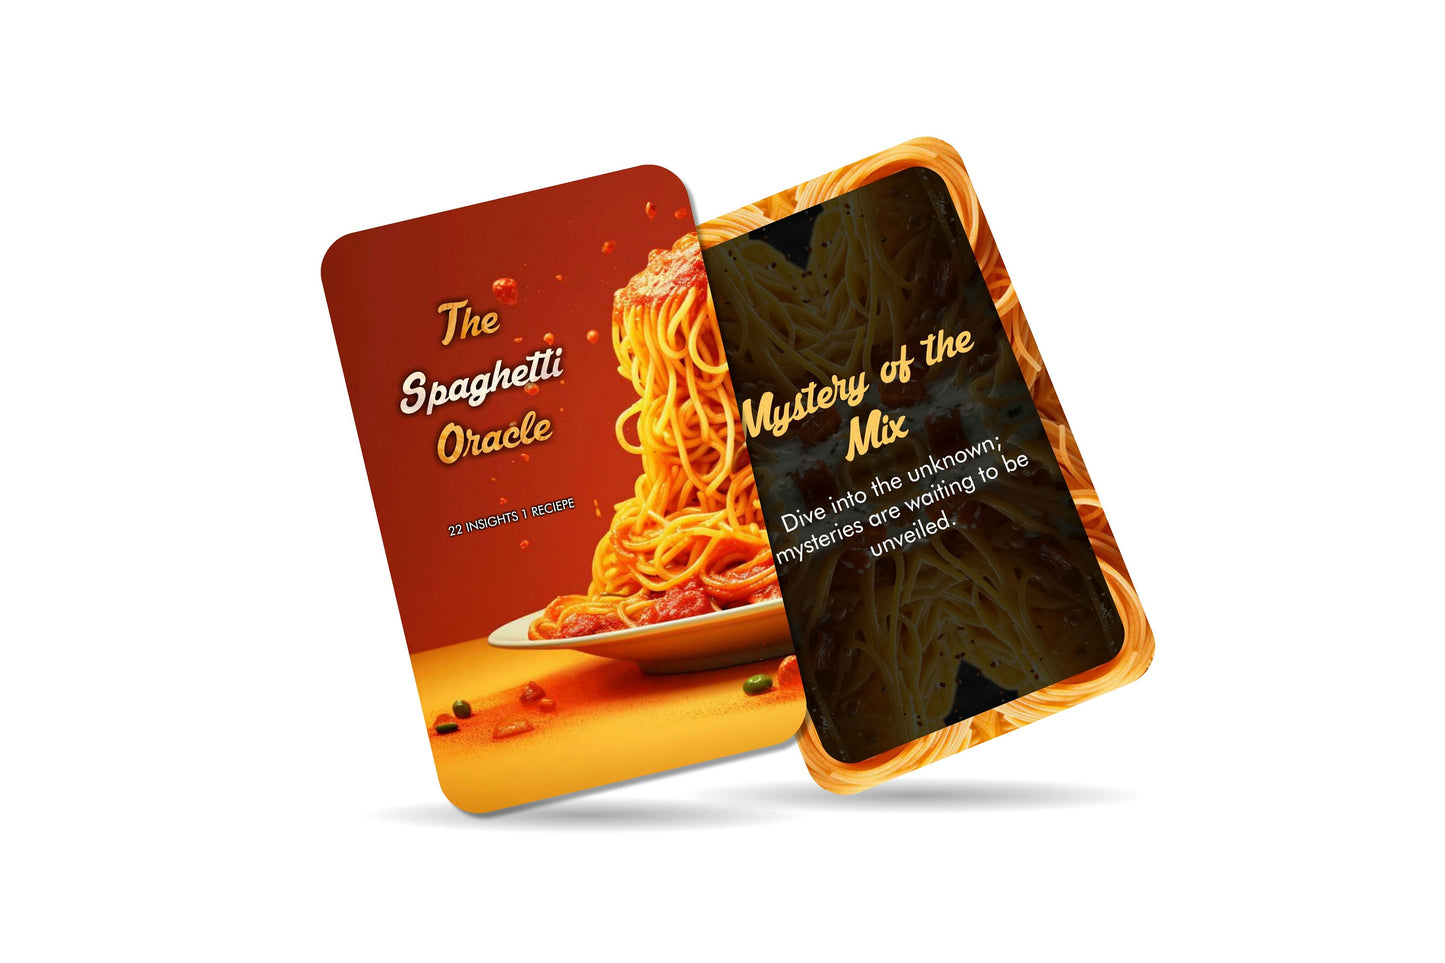 The Spaghetti Oracle - Twenty Two insights and One recipe